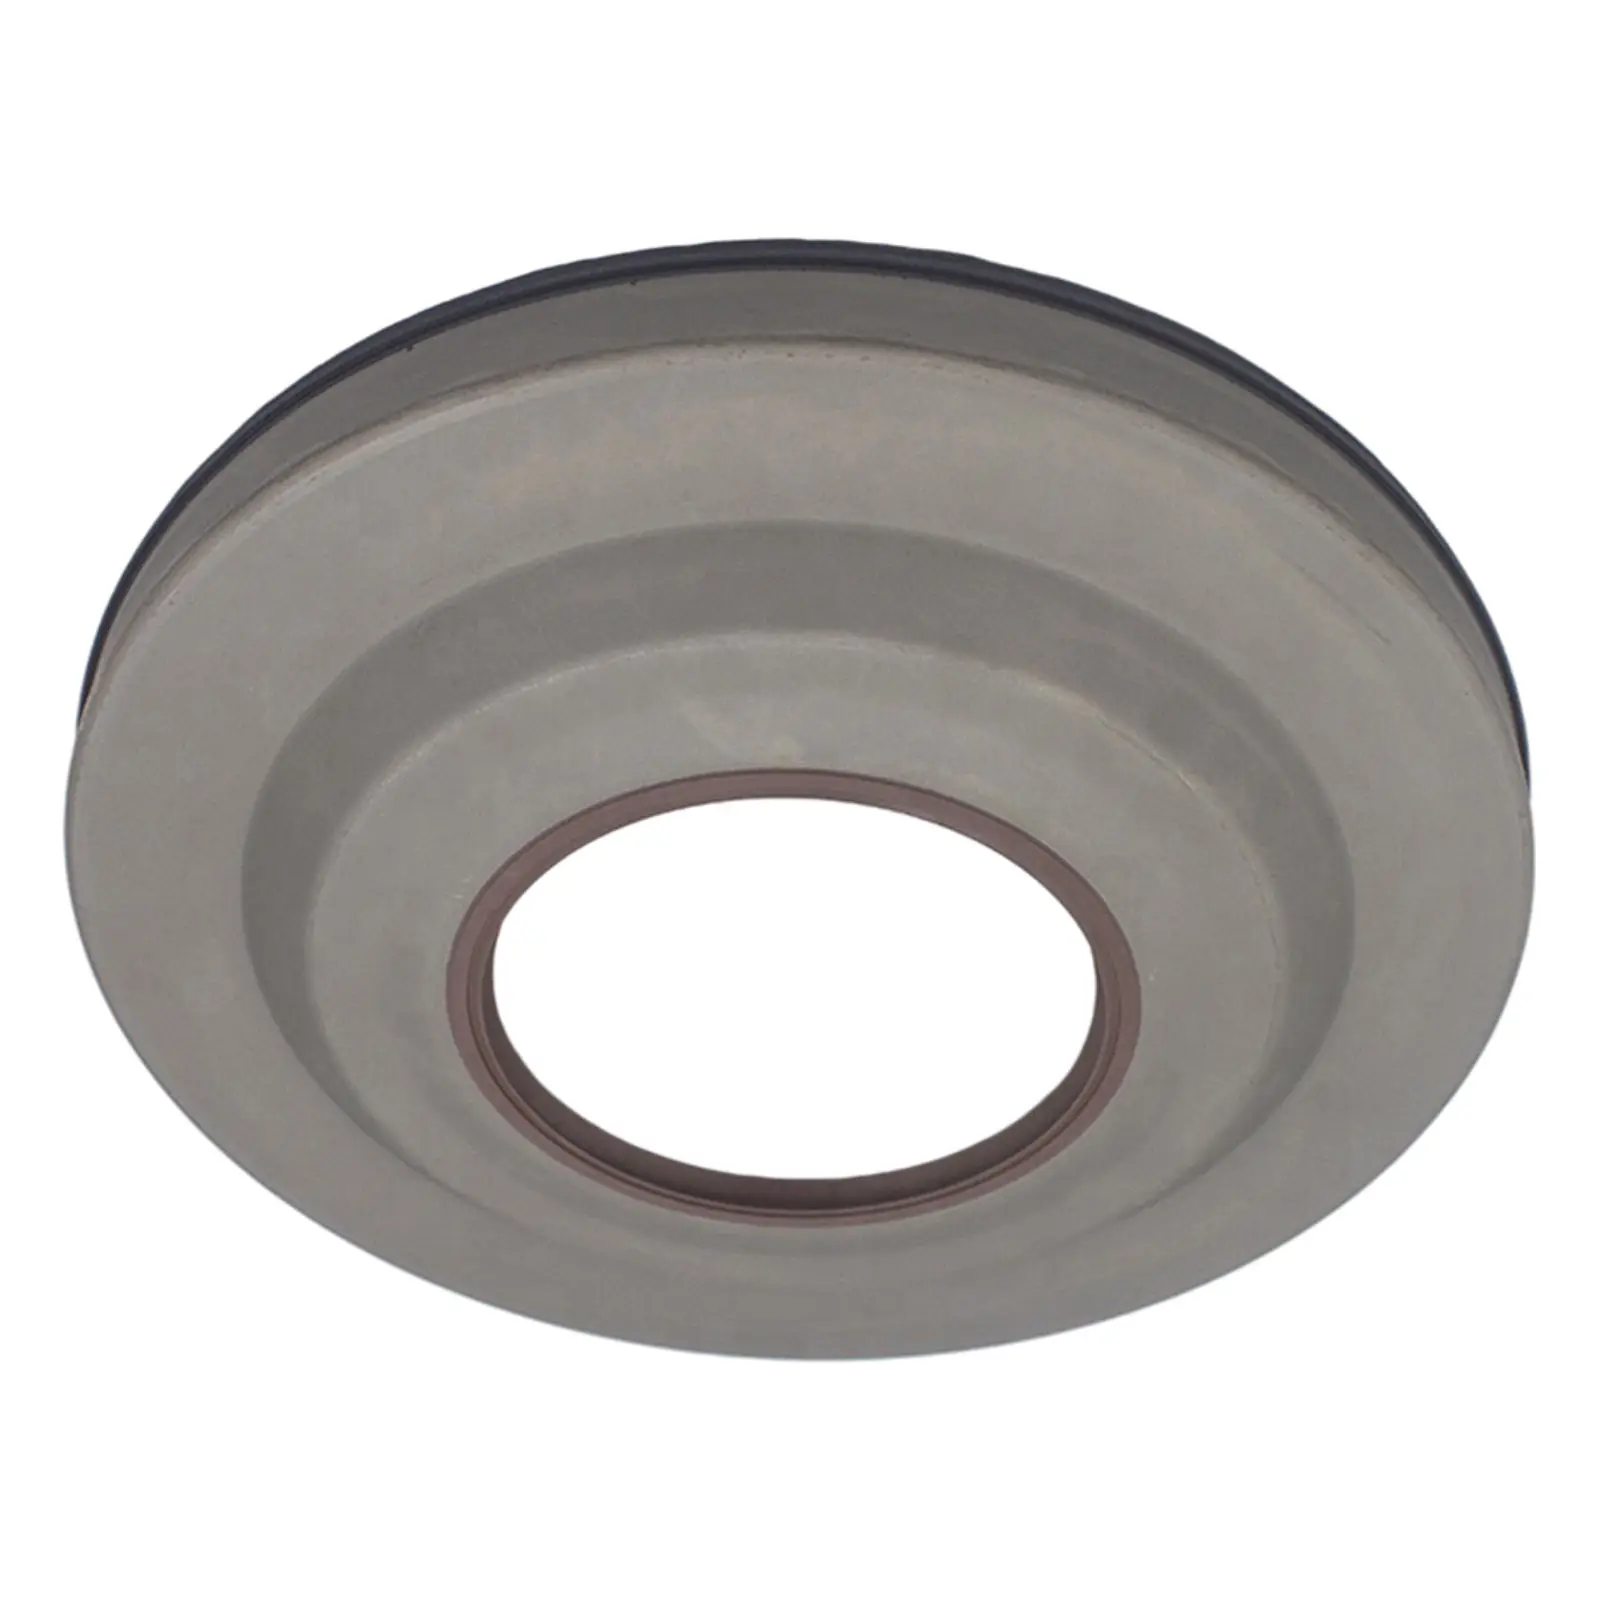 Transmission Front Clutch Cover Oil Seal Stainless Steel Fits for Volvo 6DCT450 Accessories